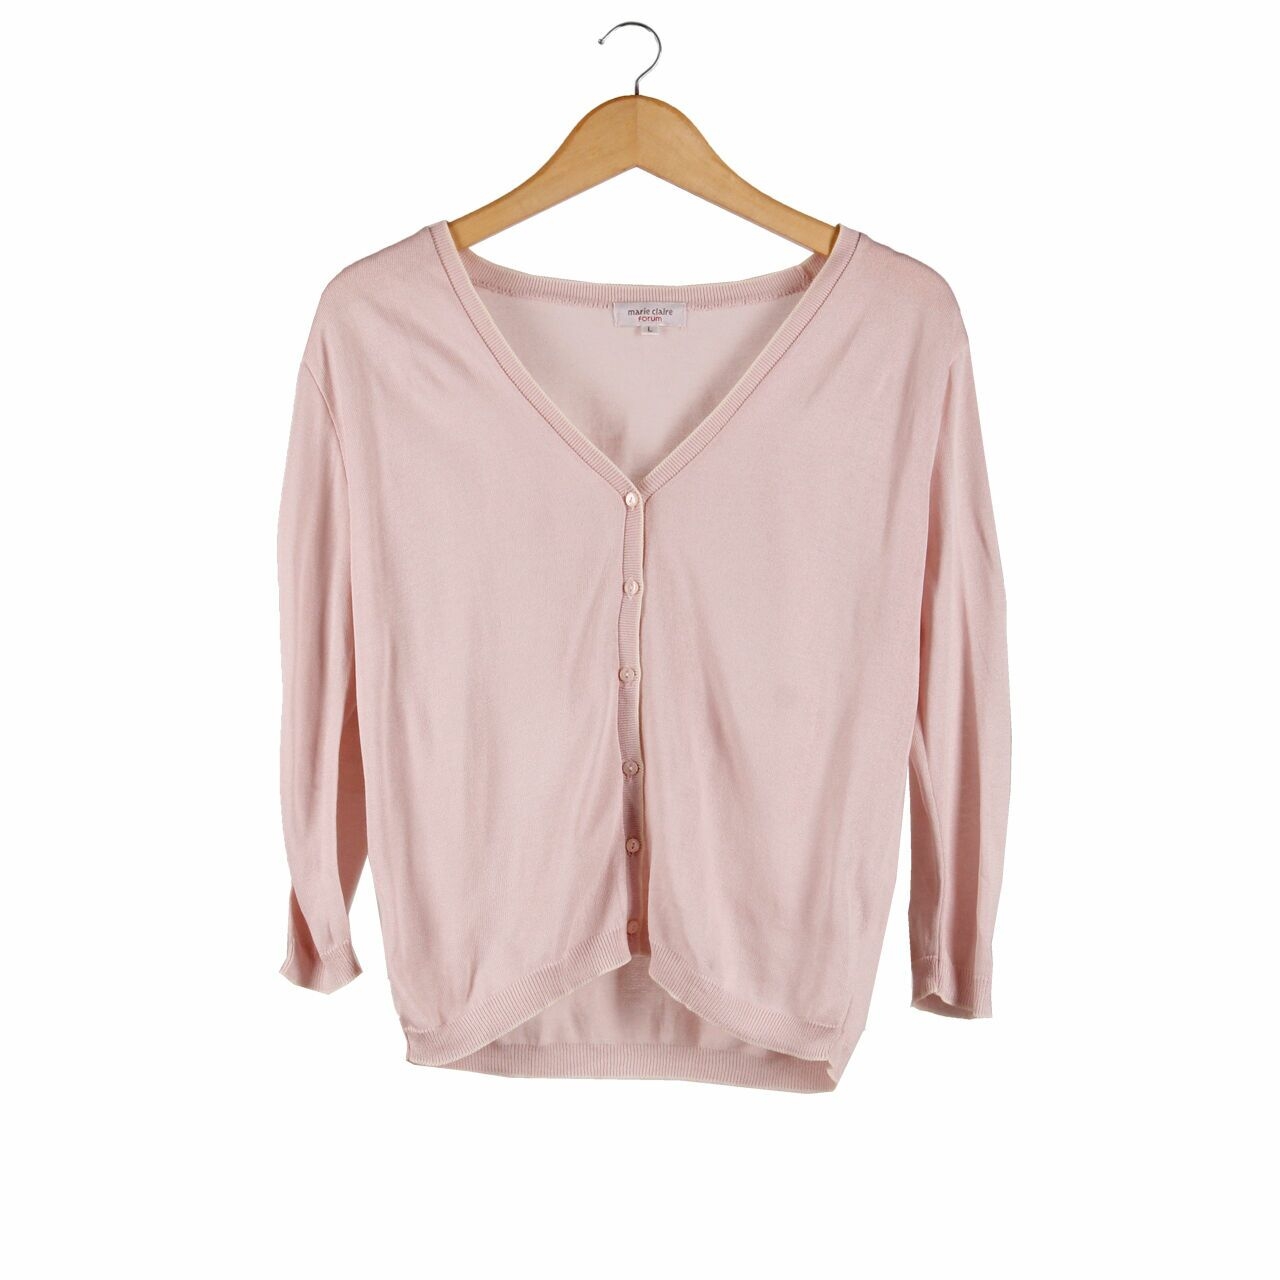 Marie Claire Soft Pink Cardigan